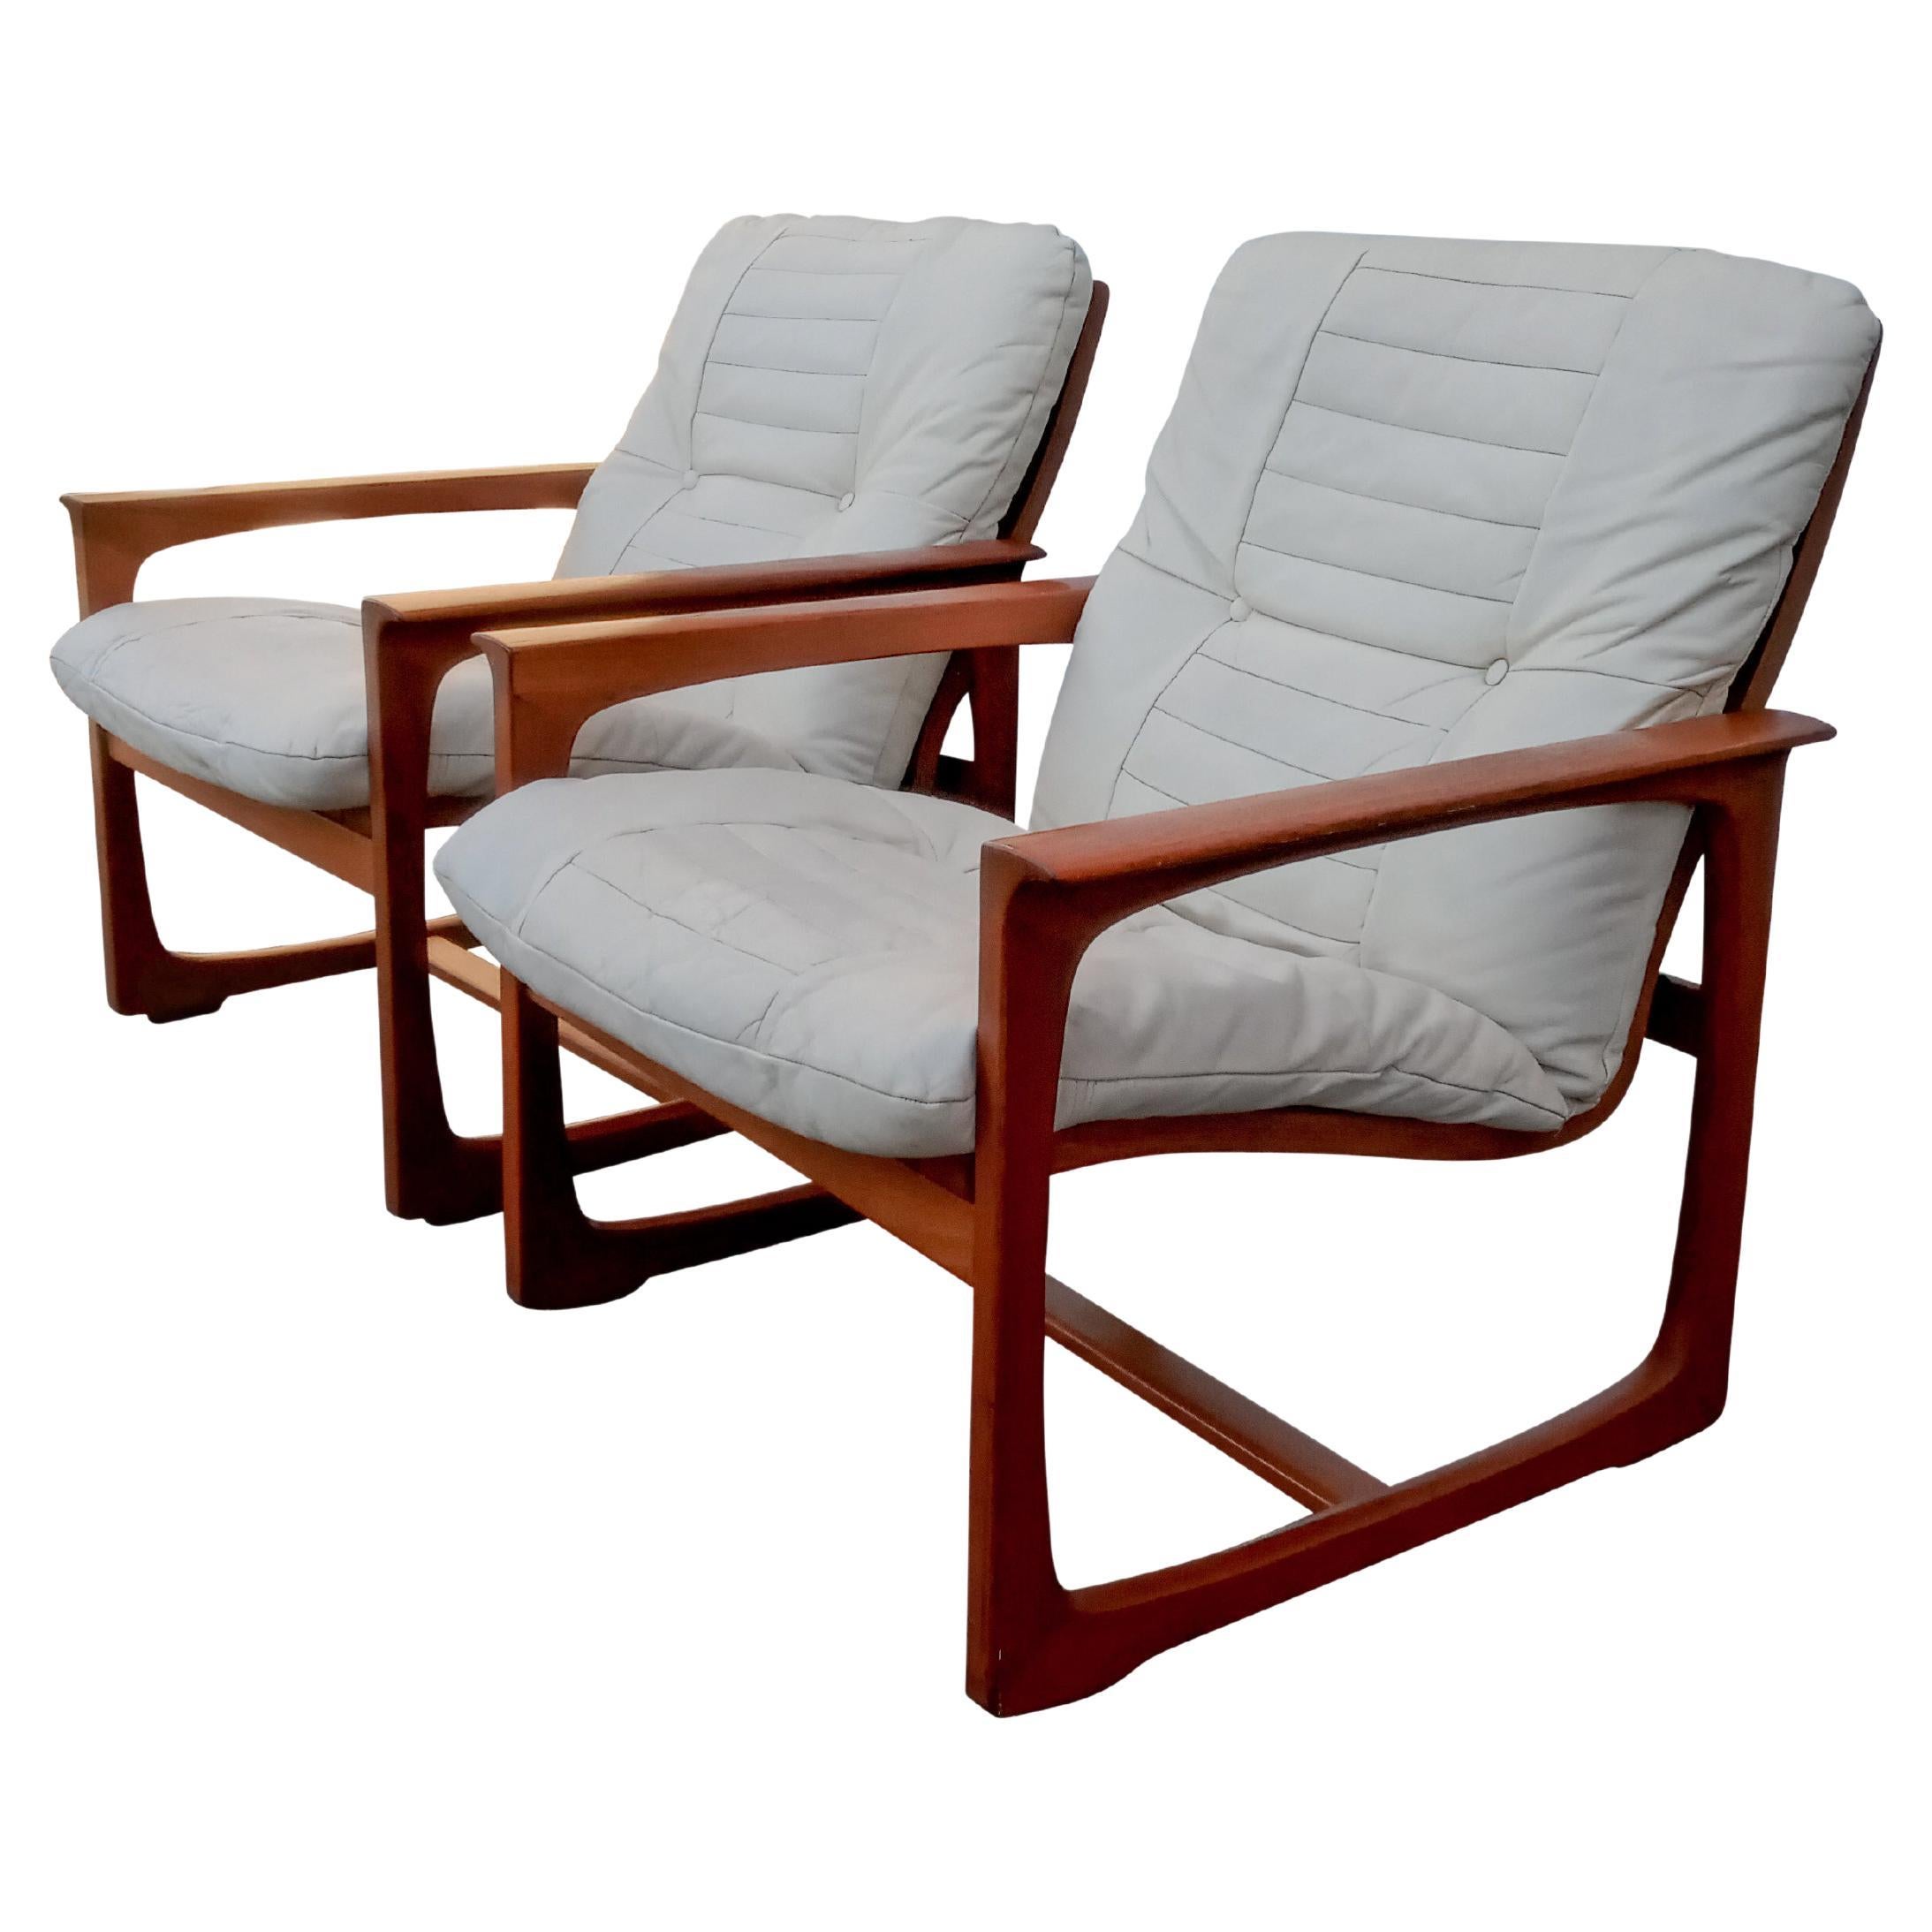 1970s Scandinavian Pair Lounge Chairs, Lied Mobler Norway, Teak & Leather